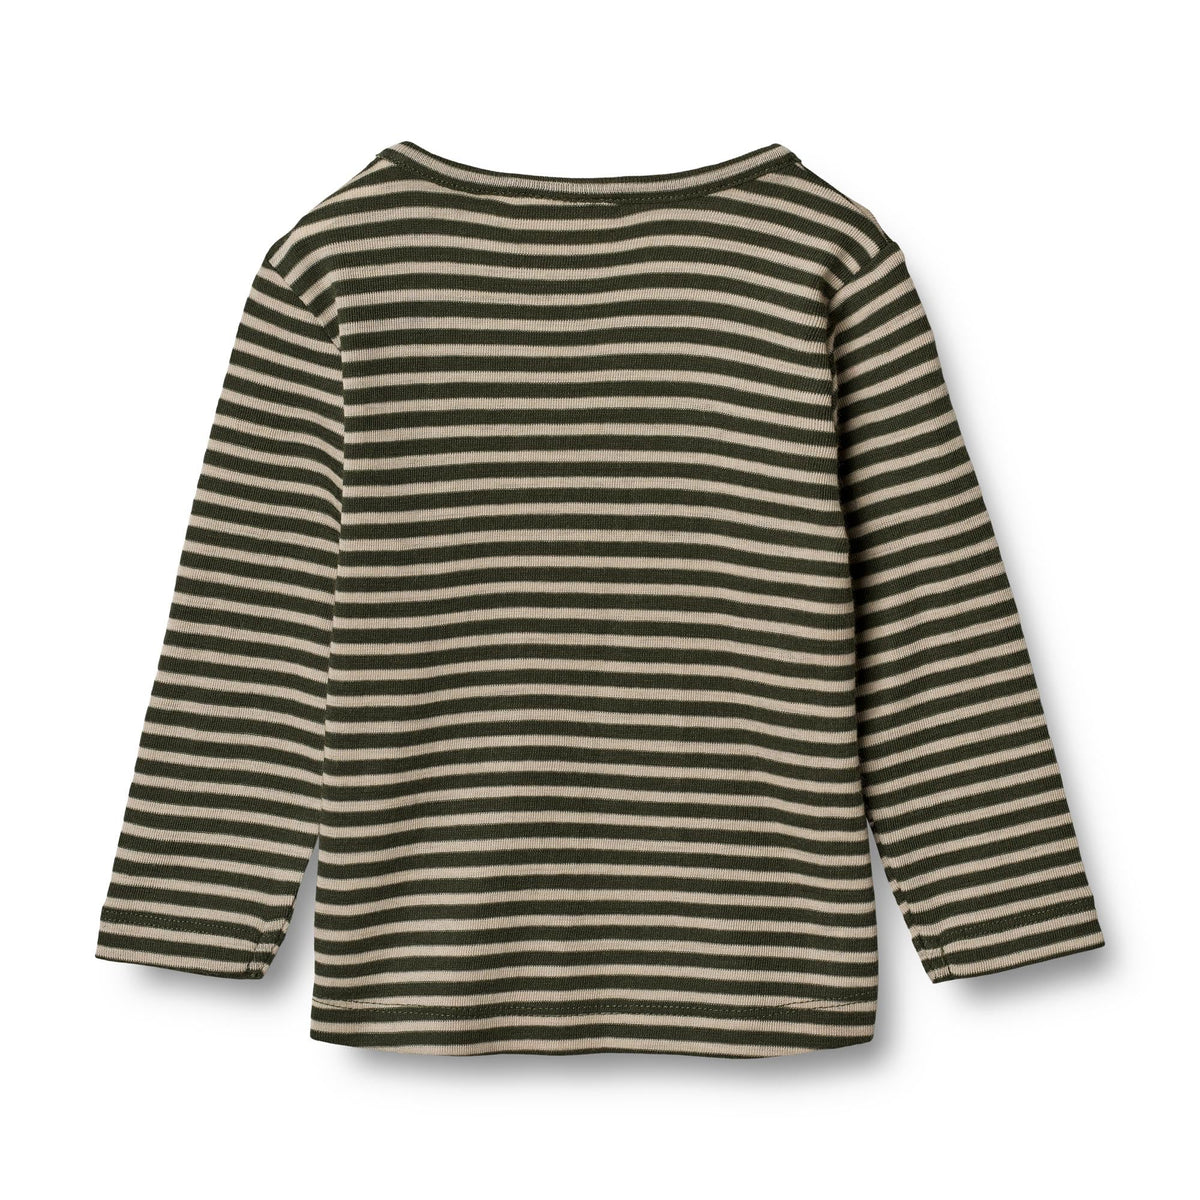 We have an incredible range of Wool T-Shirt LS Wheat Wool